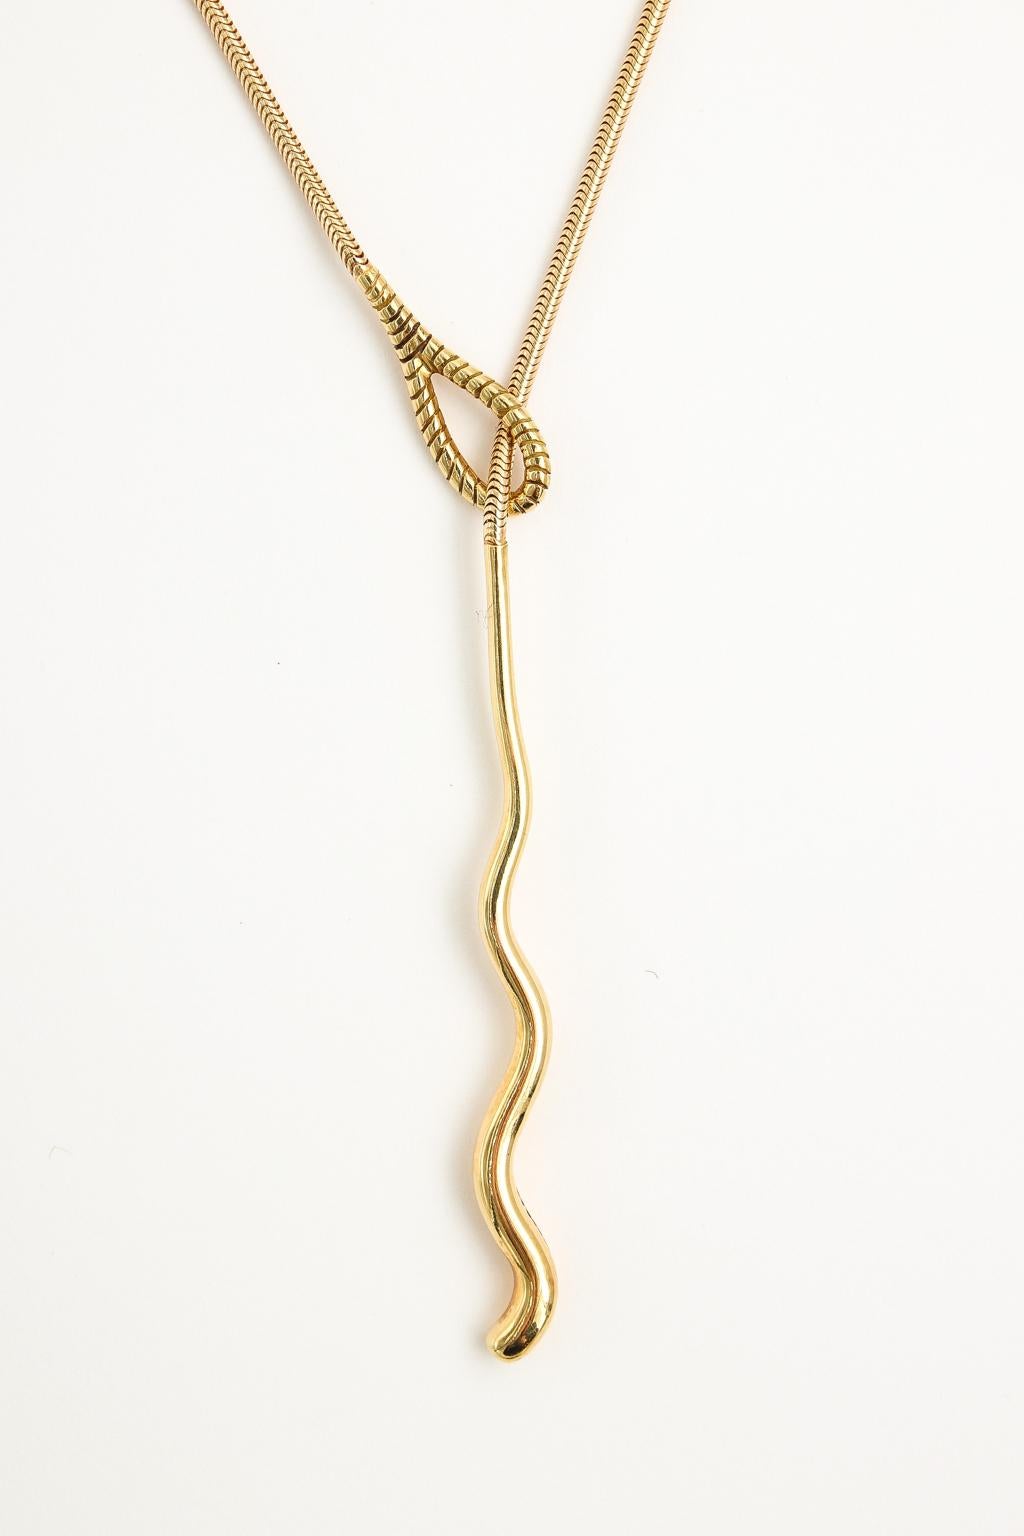 Contemporary Vintage Tiffany & Co. 18 Karat Yellow Gold Snake Chain Lariat Toggle Necklace